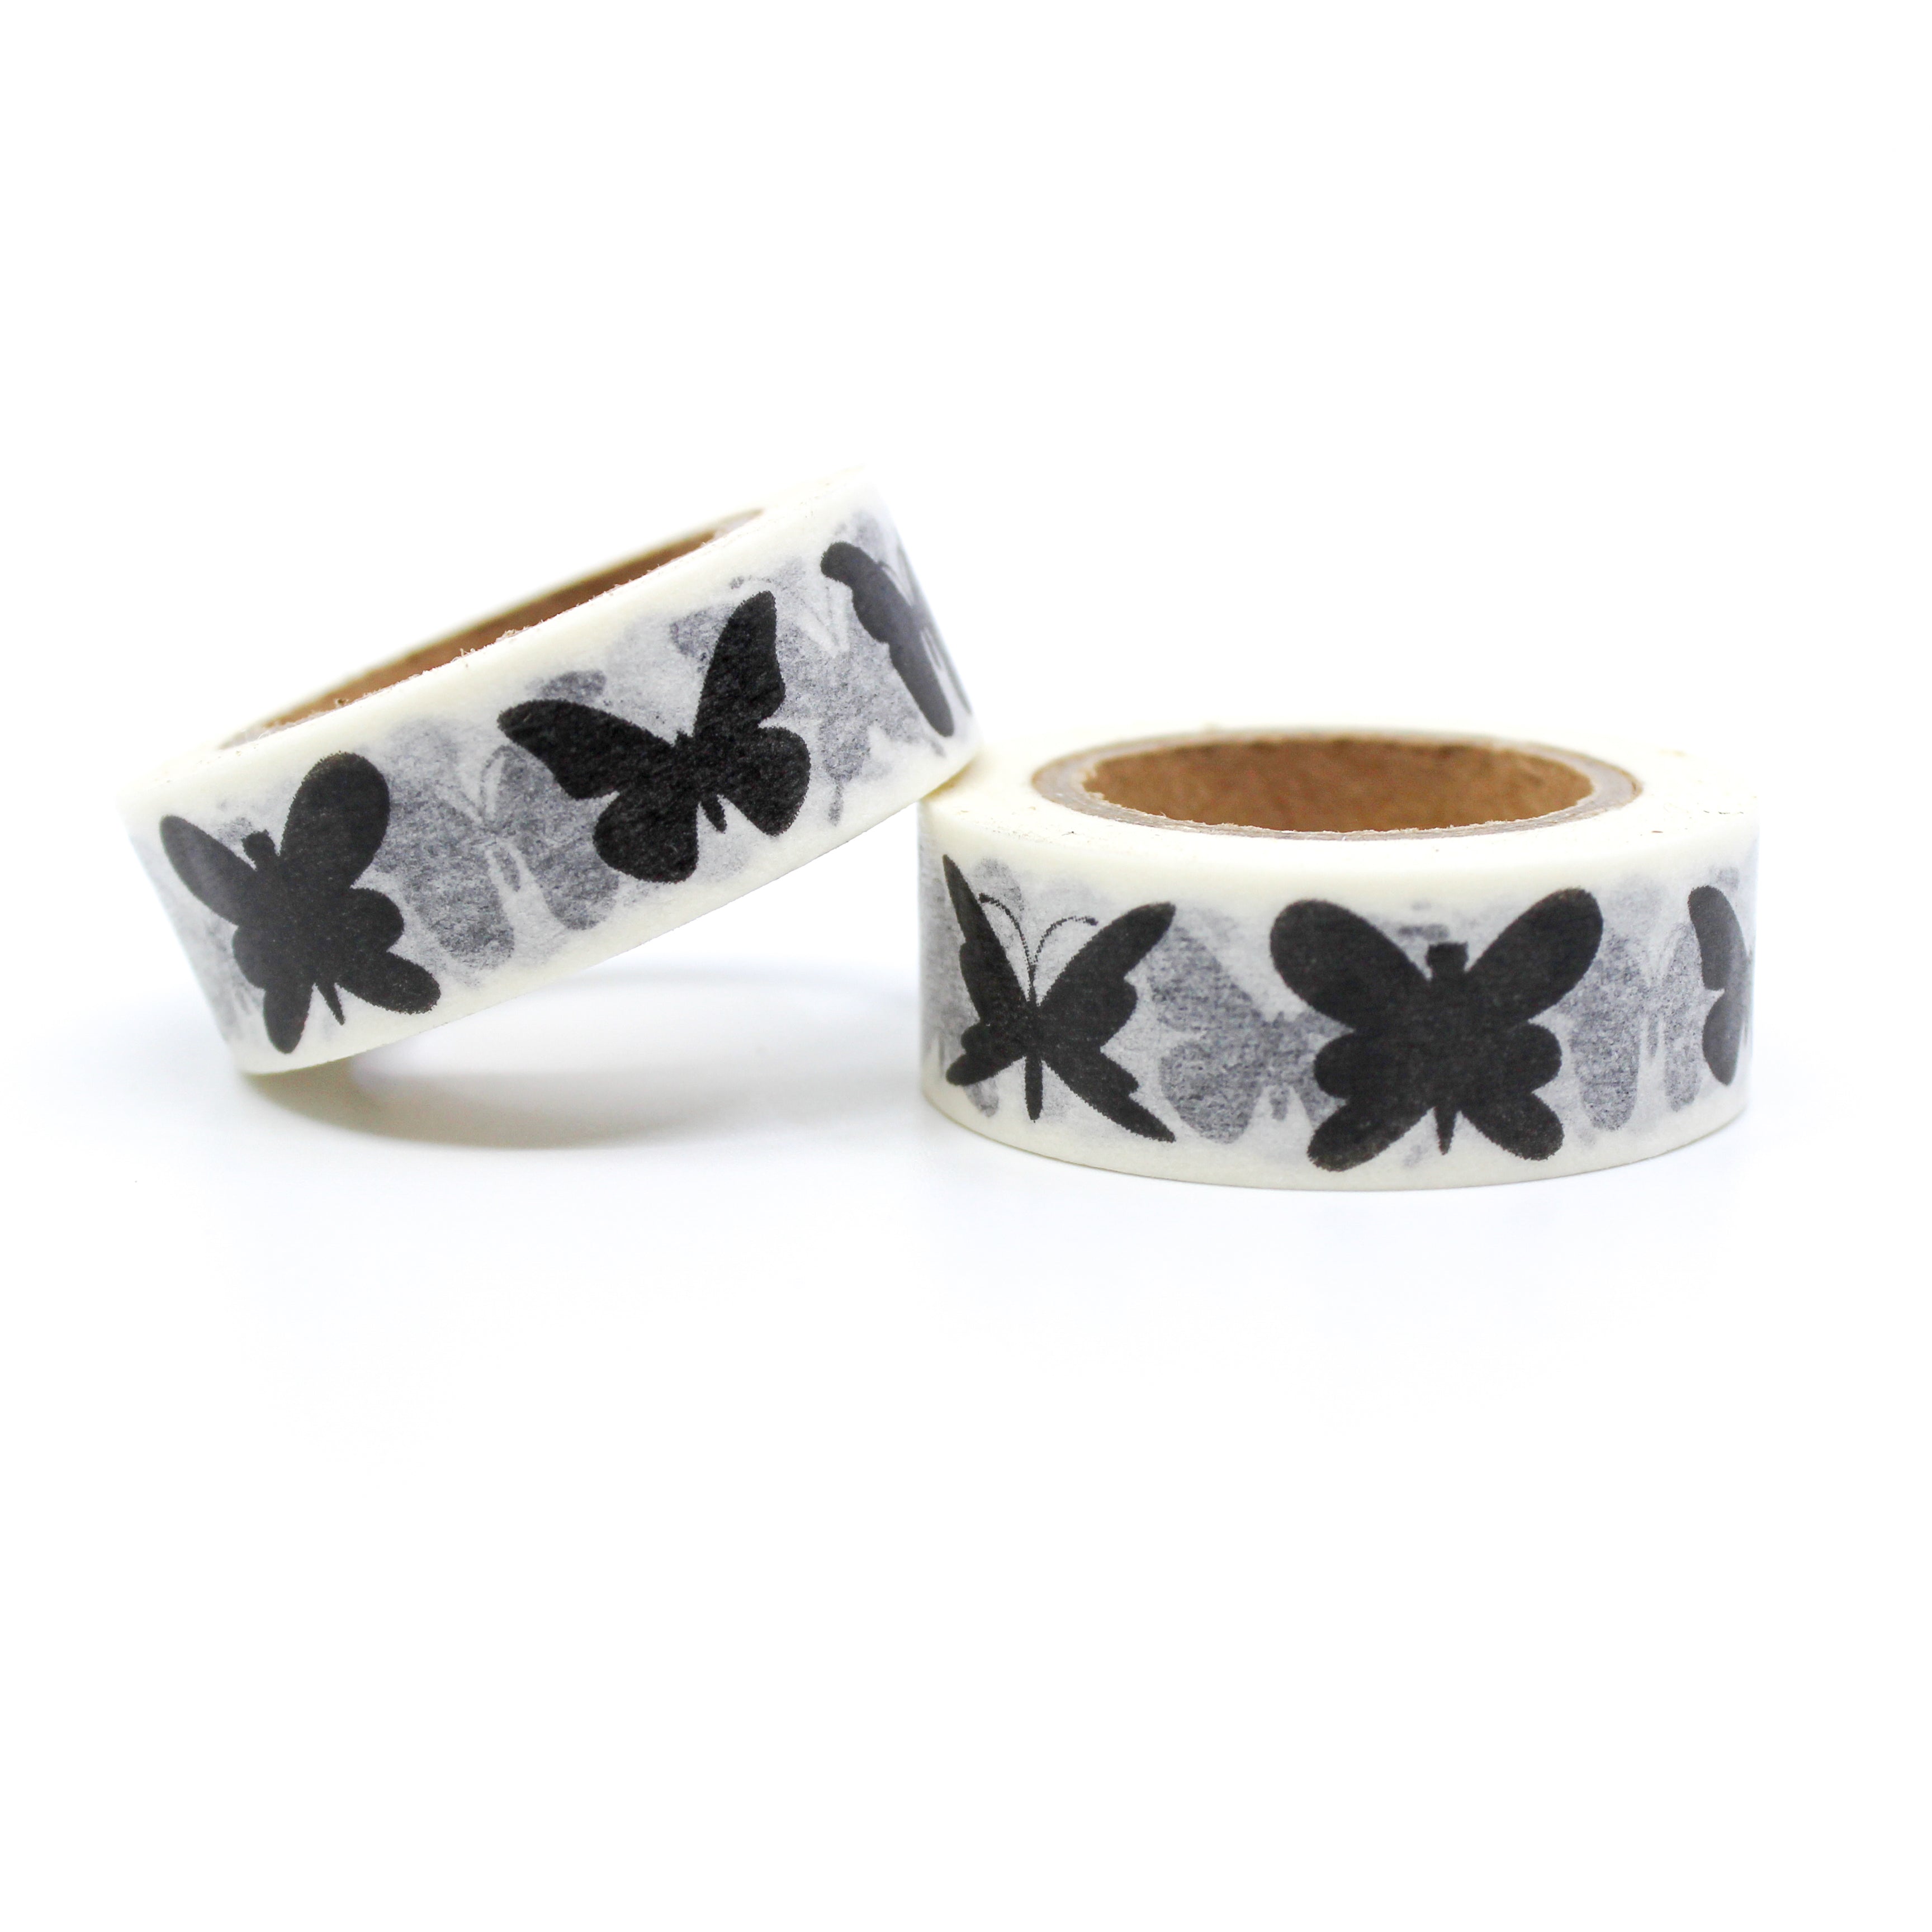 This is a collection of black and white butterflies for Journal Supplies, Scrapbooking washi tapes from BBB Supplies Craft Shop